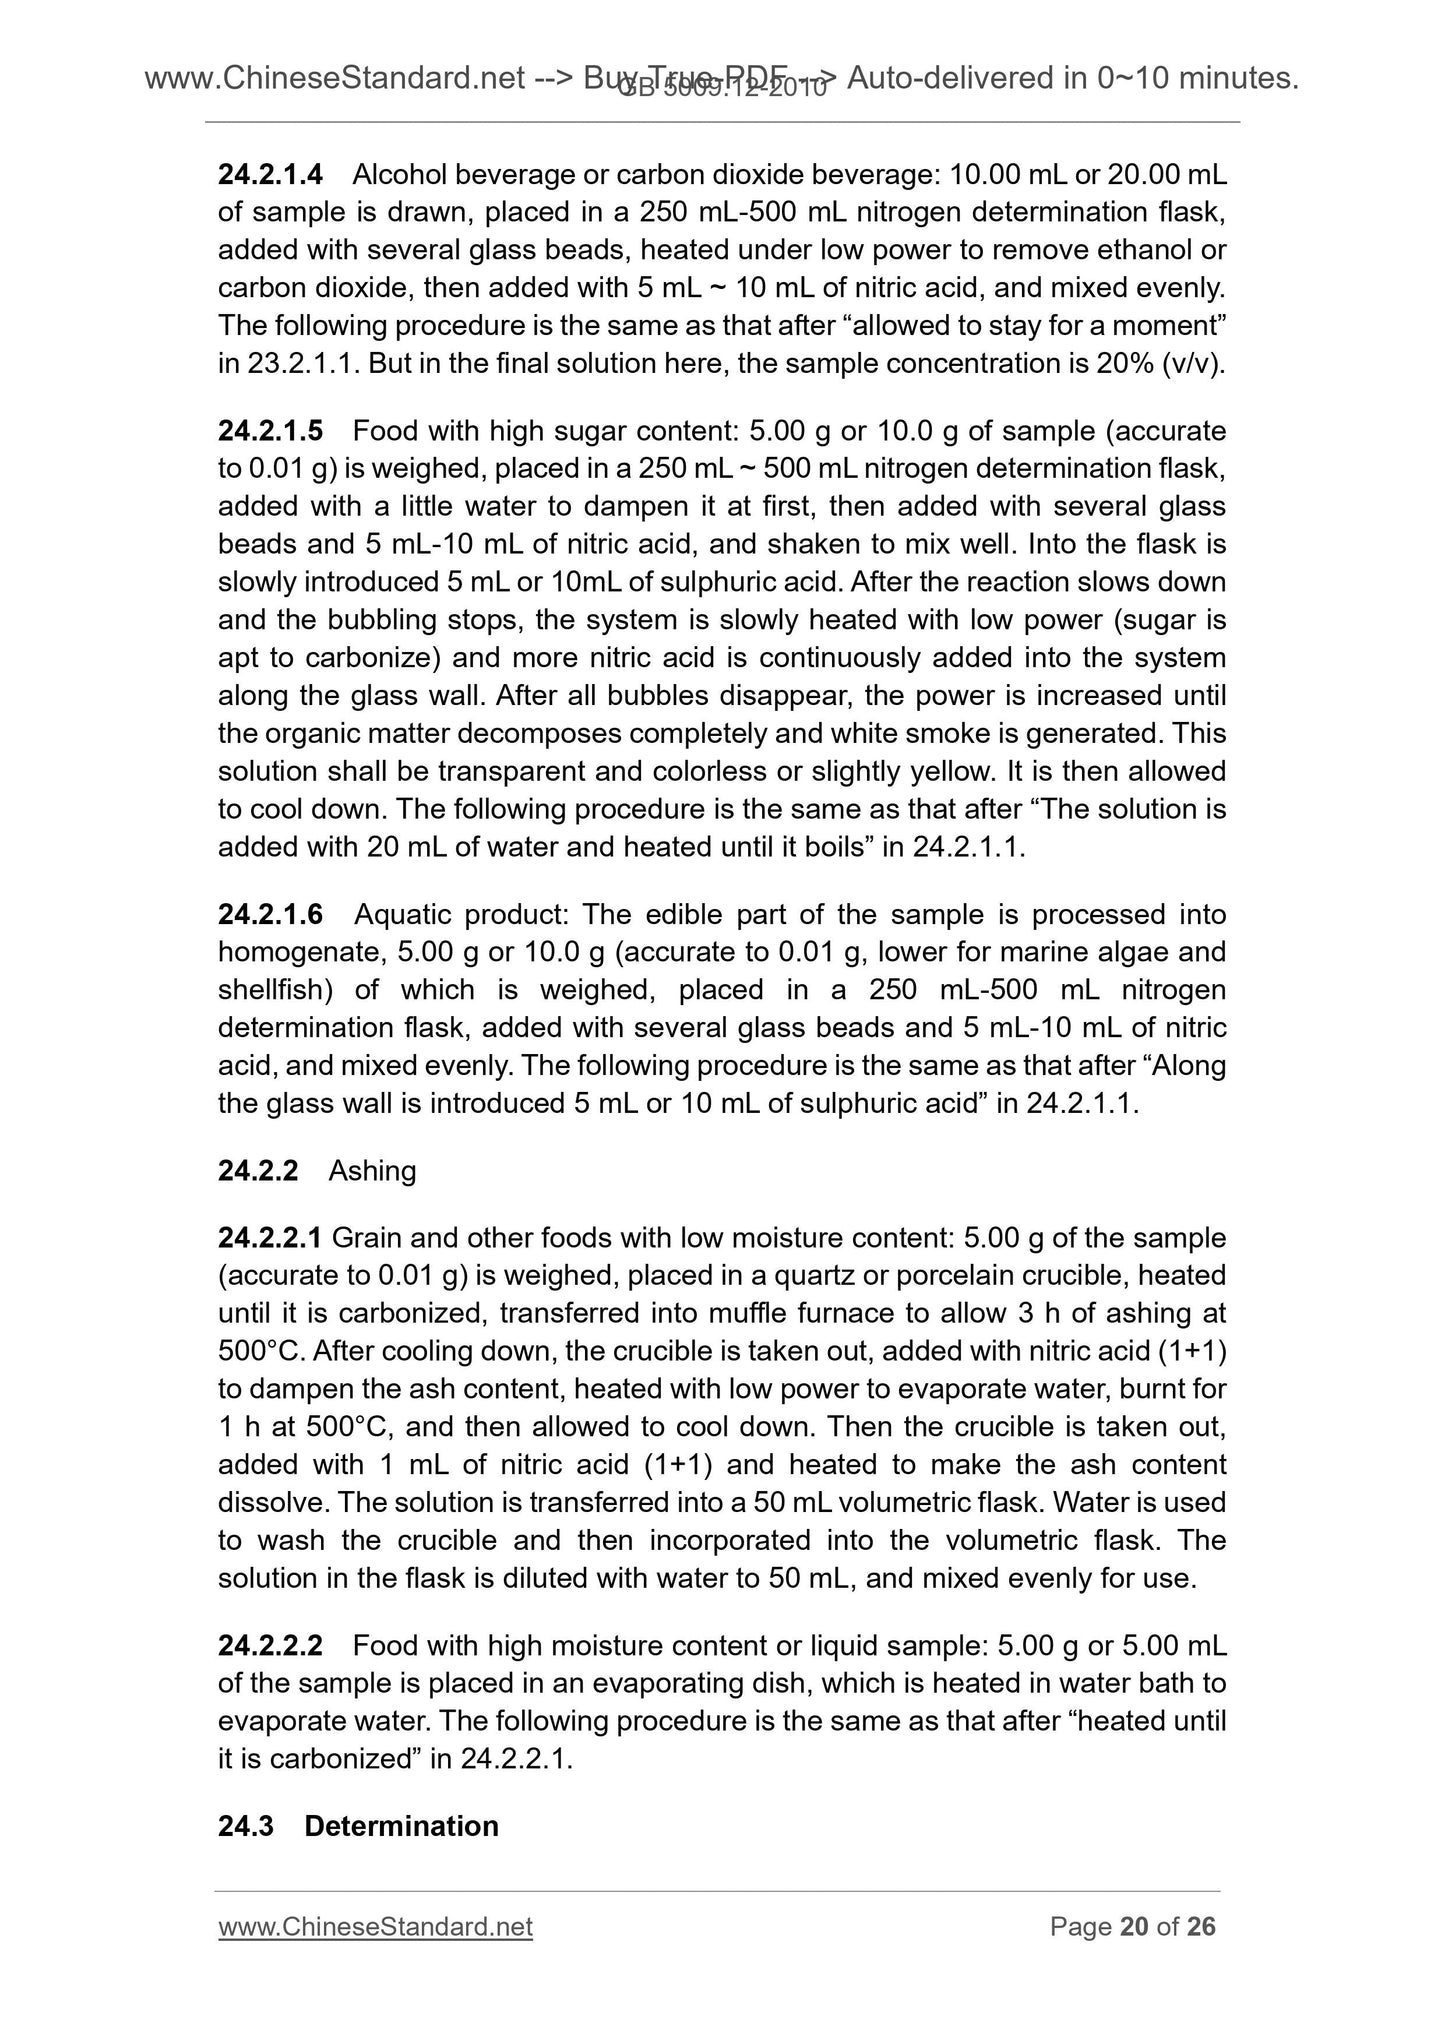 GB 5009.12-2010 Page 11